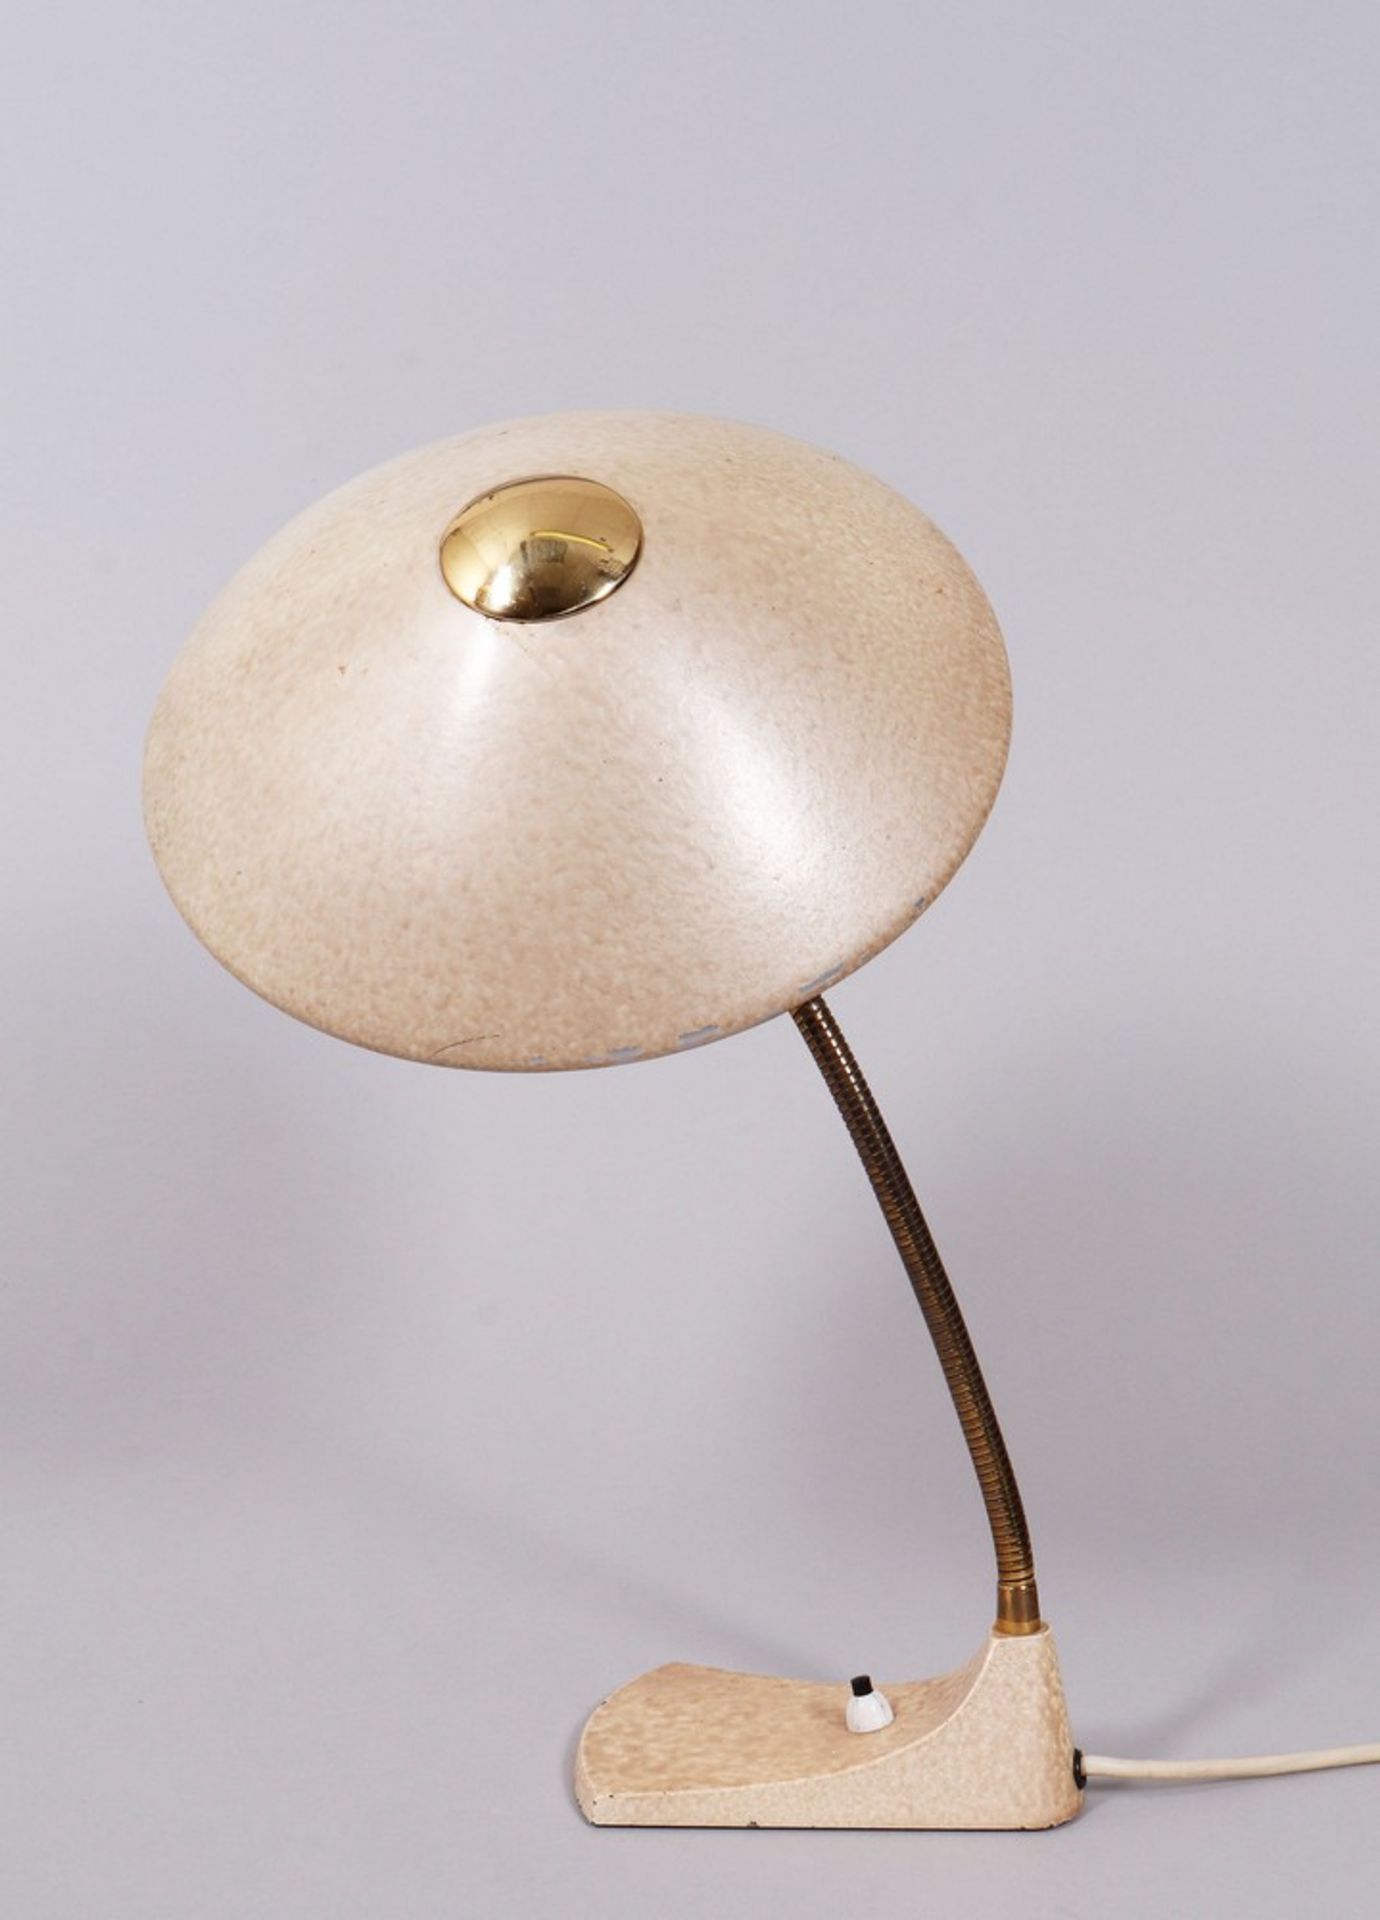 Desk lamp, probably Philips, 1950s - Image 3 of 3